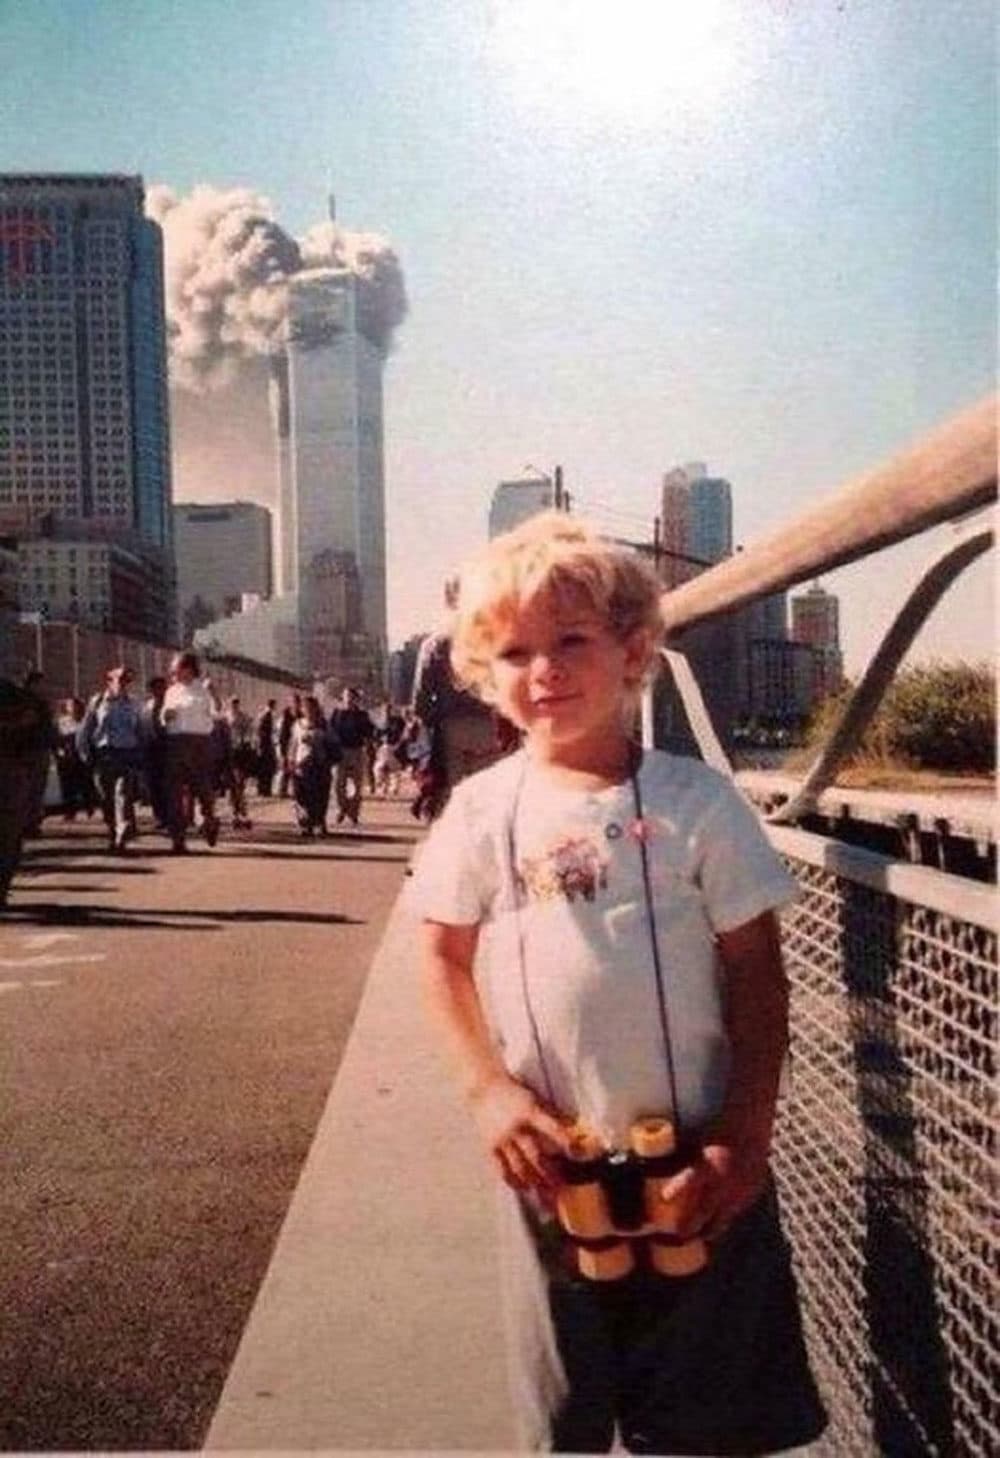 A frequently circulated viral photo, which shows a smiling kid in front of one of the burning World Trade Center towers (courtesy Underunderstood)